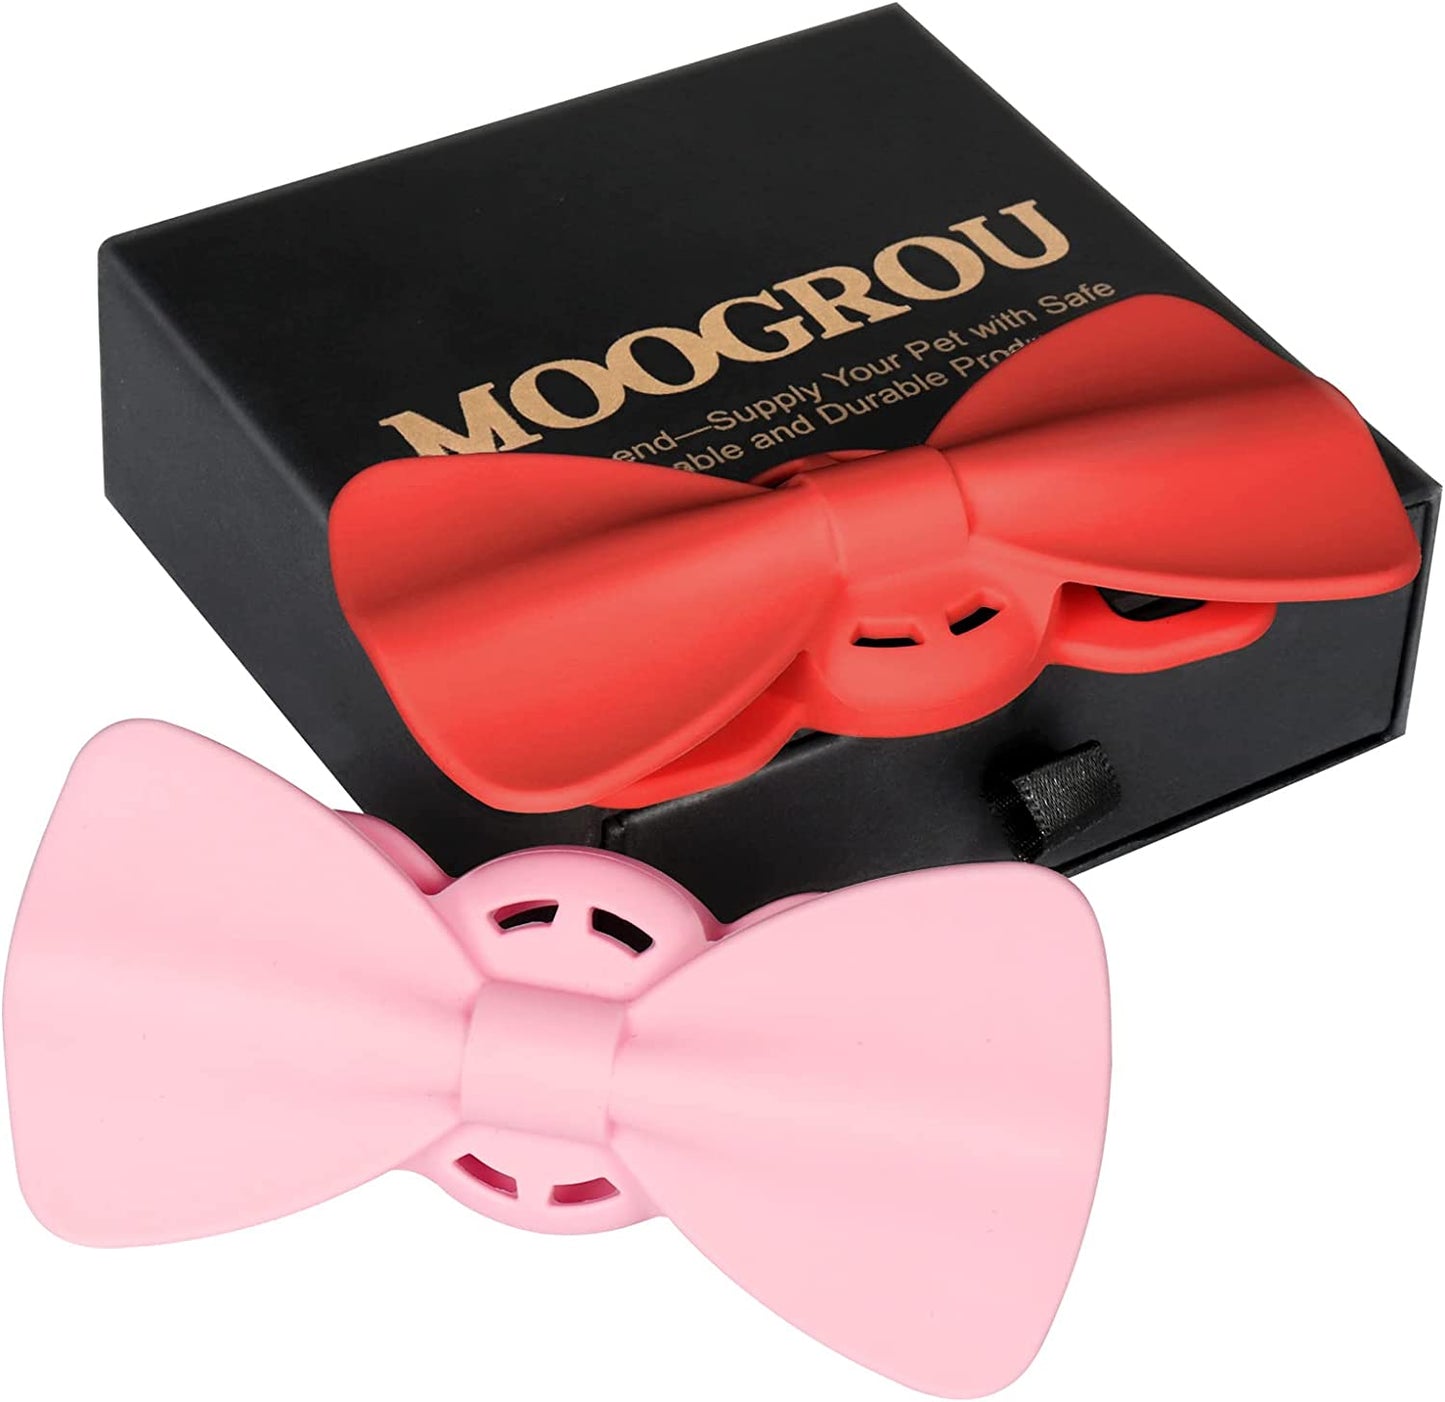 MOOGROU Airtag Dog Collar Holder(2 Pack) Compatible with Apple Airtag Tracker,Premium Silicone Bowtie Airtag Case for Pet Loops,Lightweight Air Tag Holder for Cat Collar Electronics > GPS Accessories > GPS Cases MOOGROU Pink+Red M 1" 